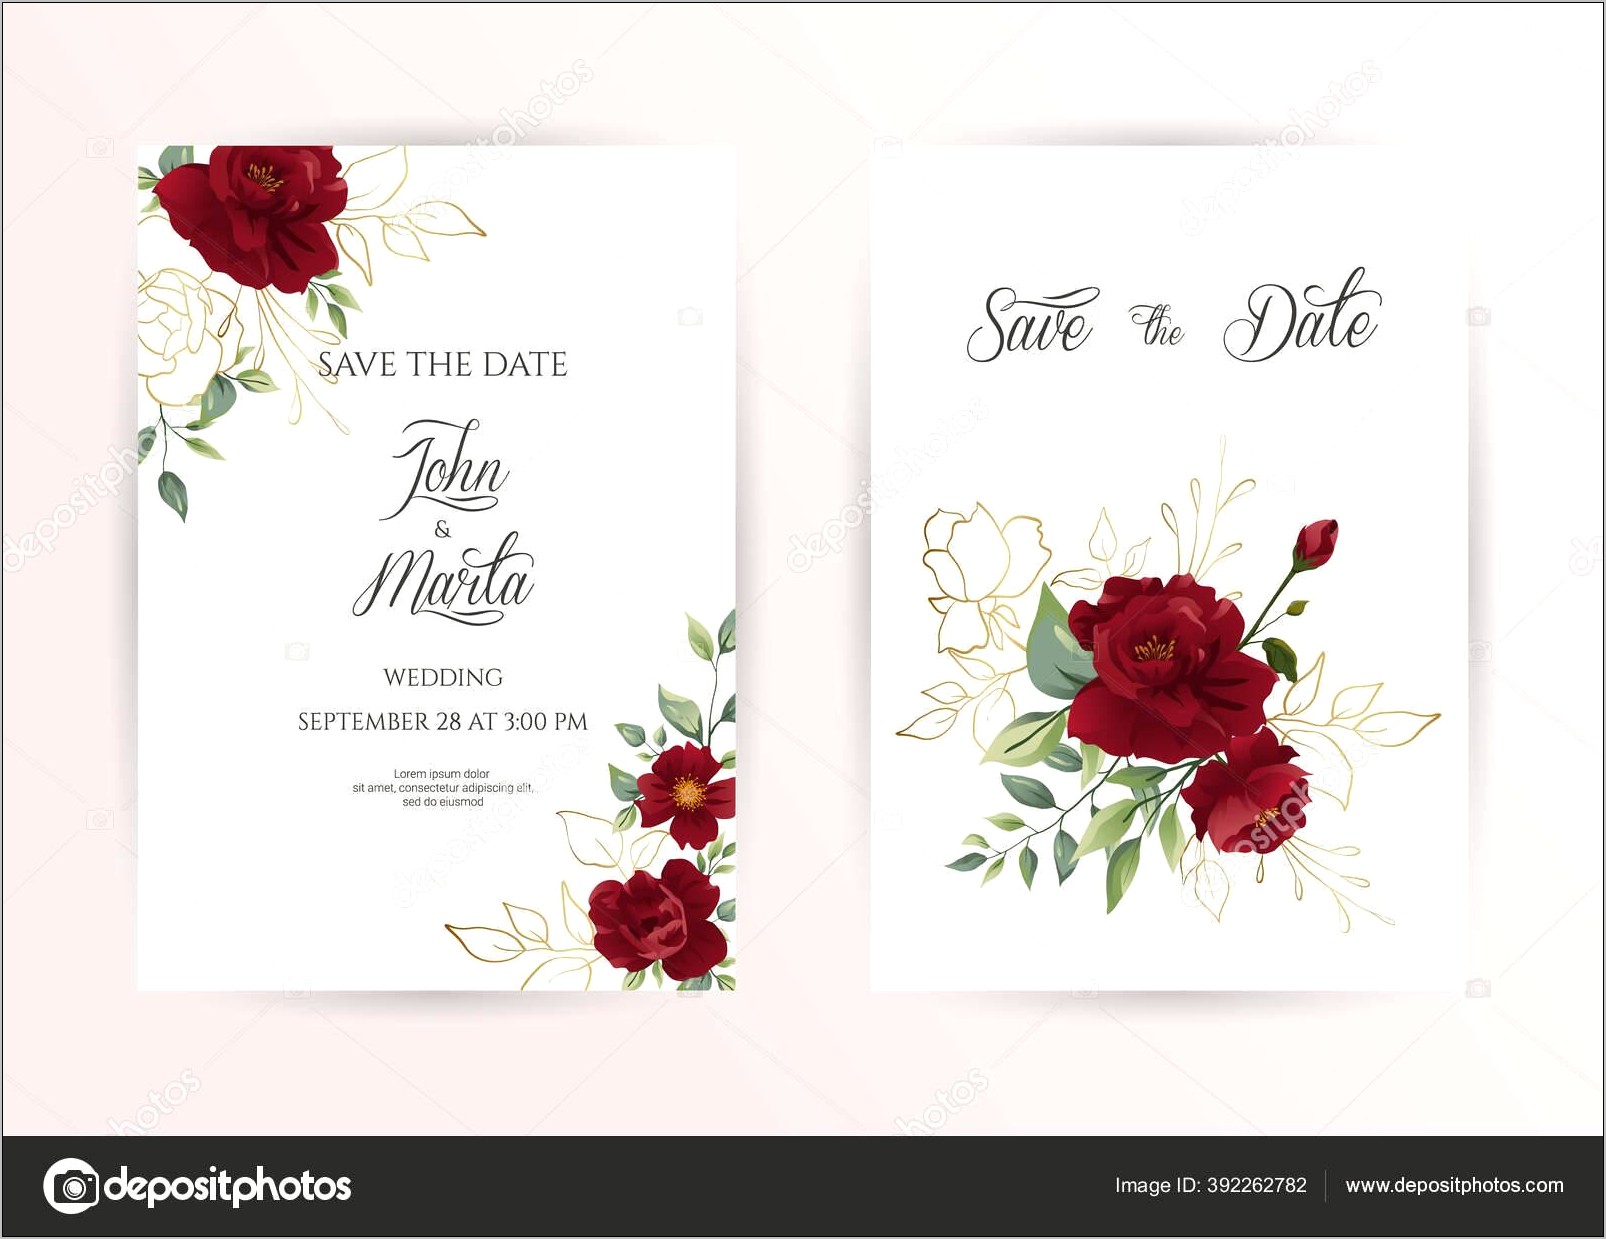 Dusty Blue Wedding Invitation Free Template Resume Example Gallery